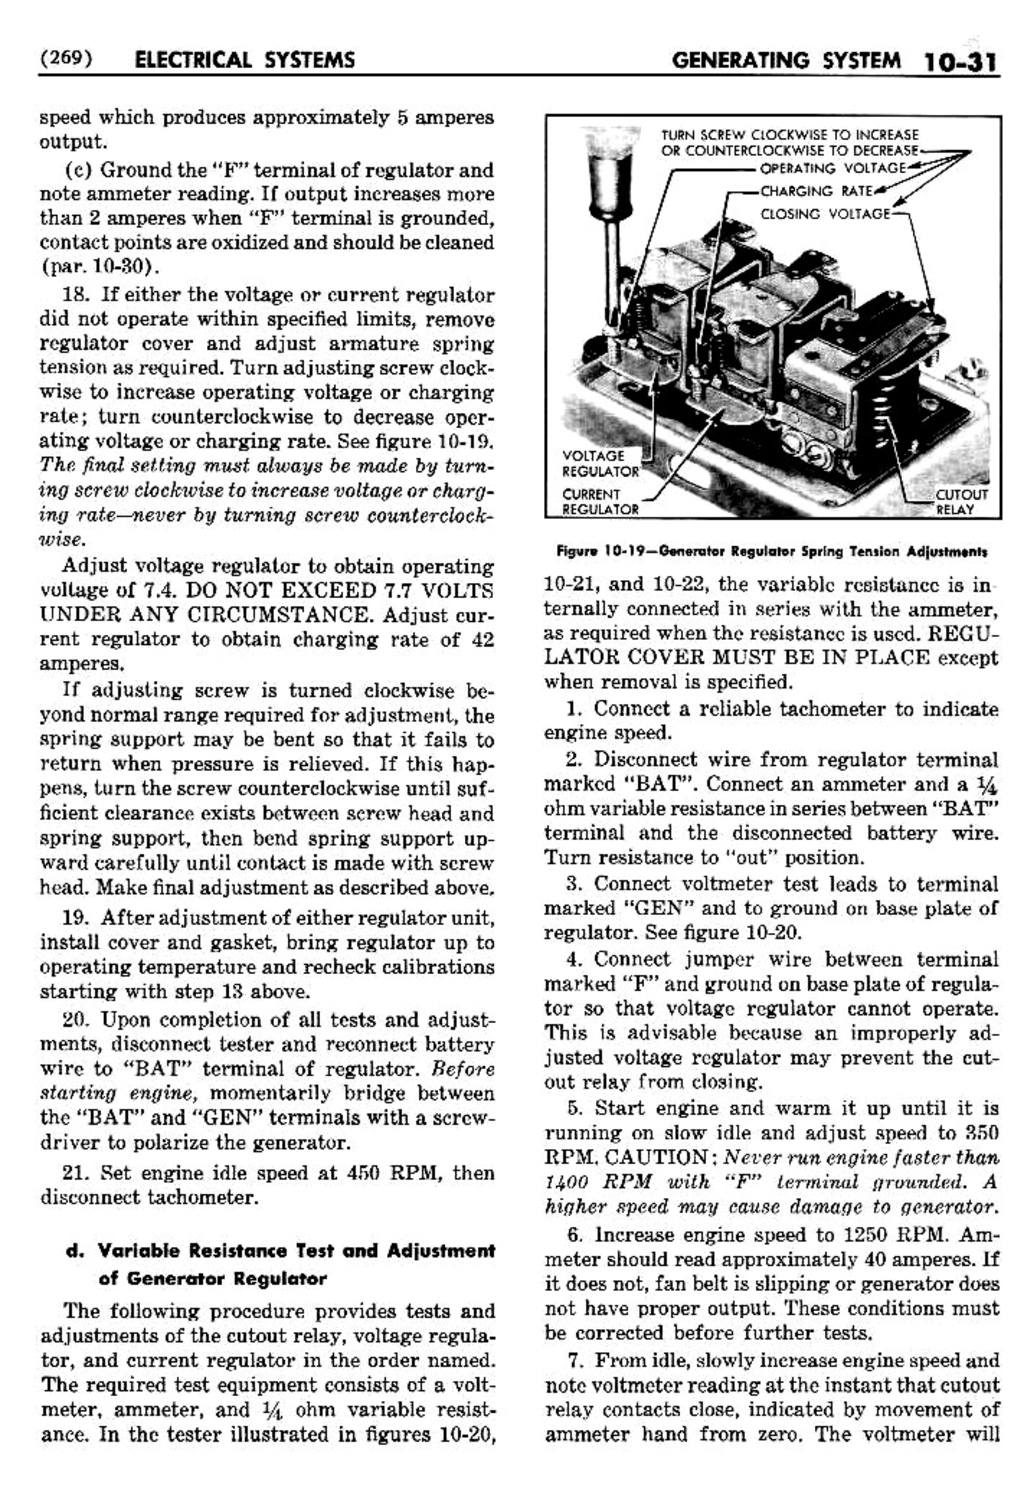 n_11 1950 Buick Shop Manual - Electrical Systems-031-031.jpg